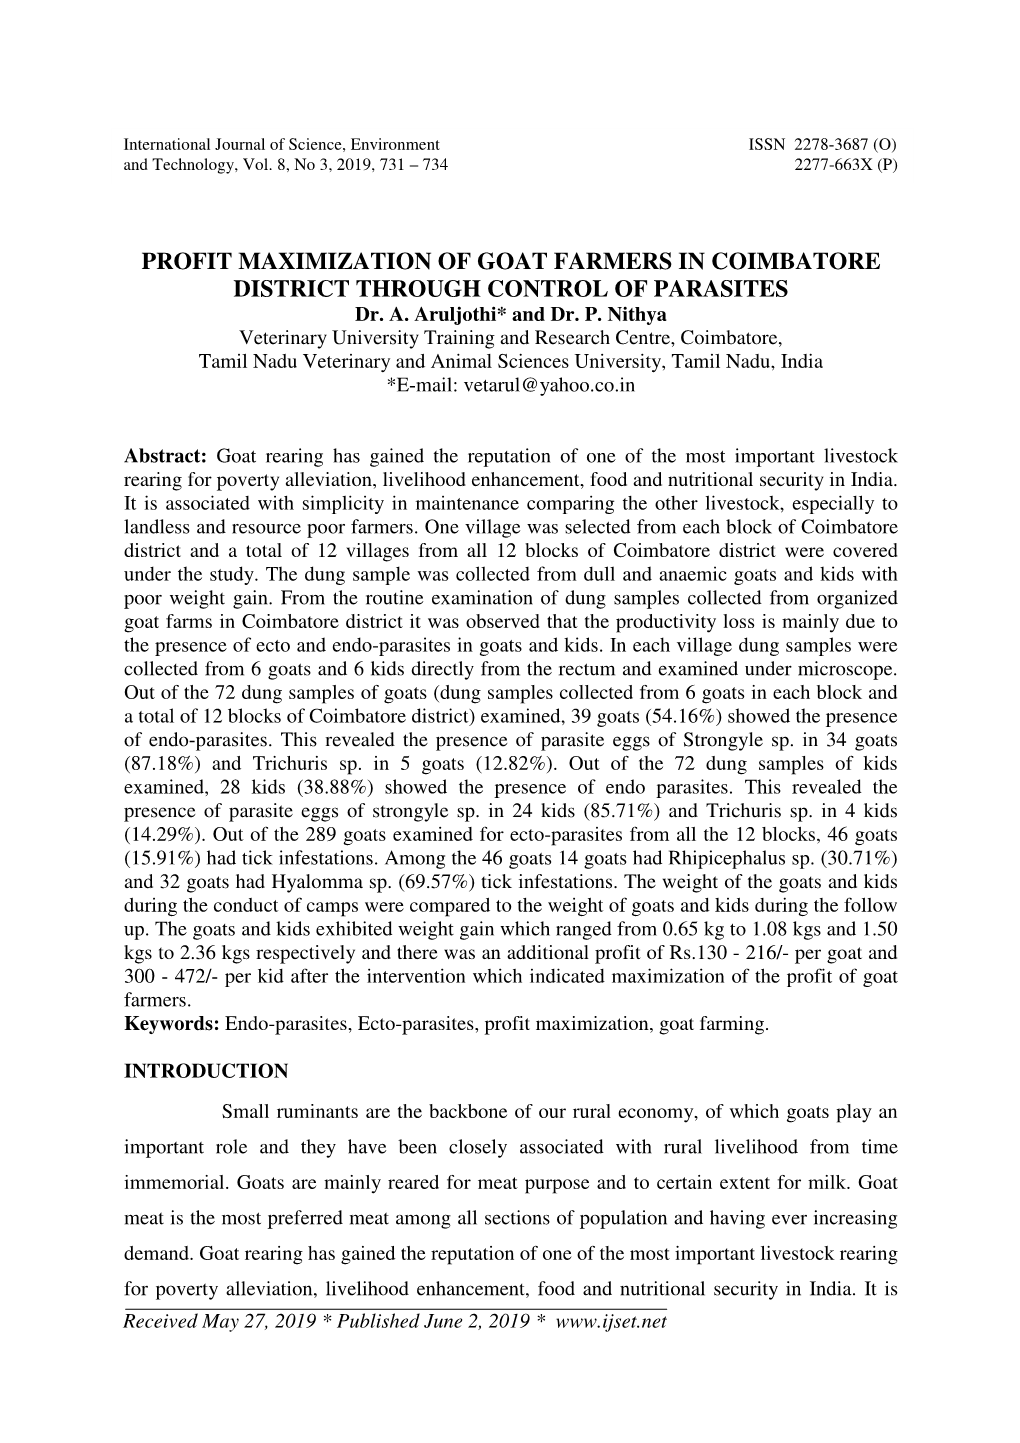 PROFIT MAXIMIZATION of GOAT FARMERS in COIMBATORE DISTRICT THROUGH CONTROL of PARASITES Dr